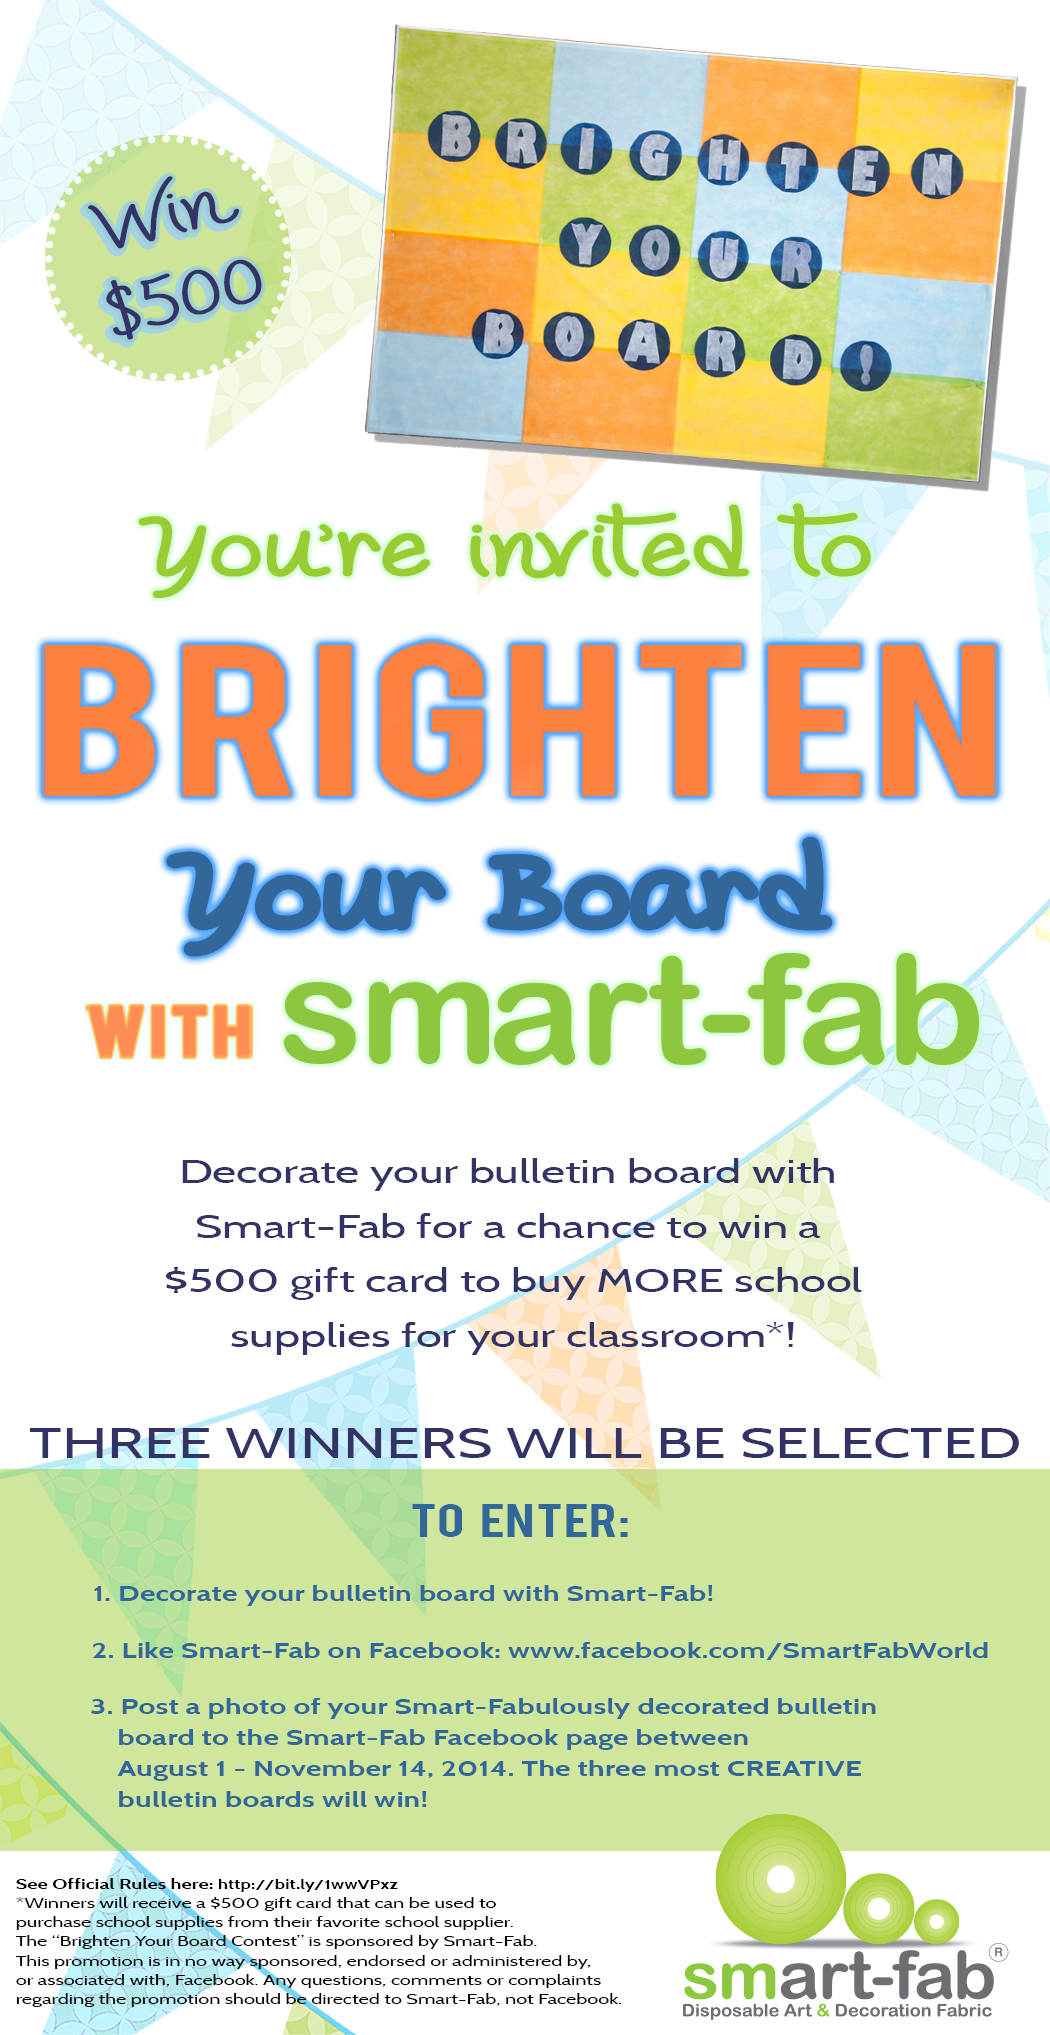 SF_Brighten_Your_Board_Contest_Updated